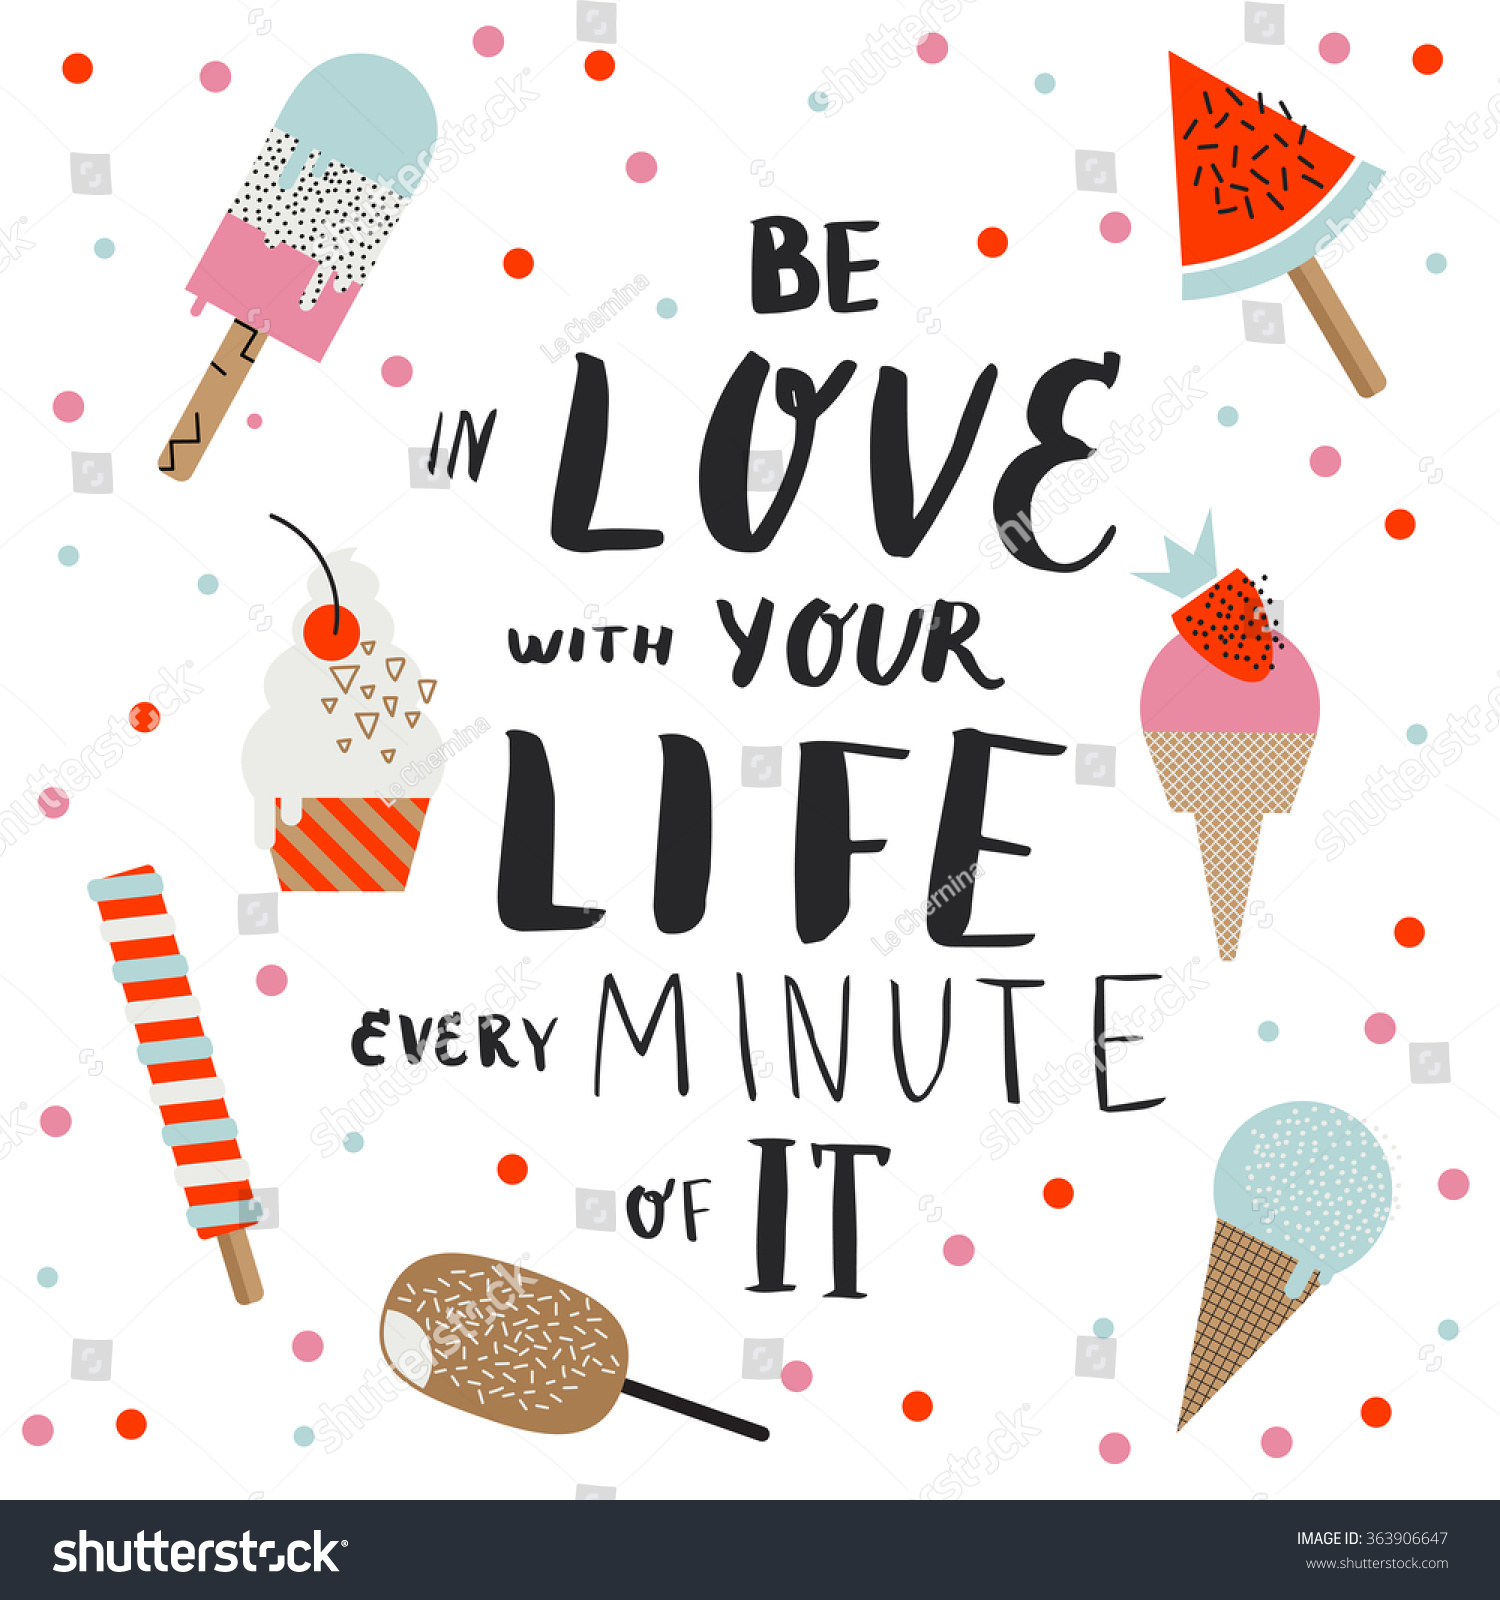 Be in love with your life every minute of It Hand drawn poster with a